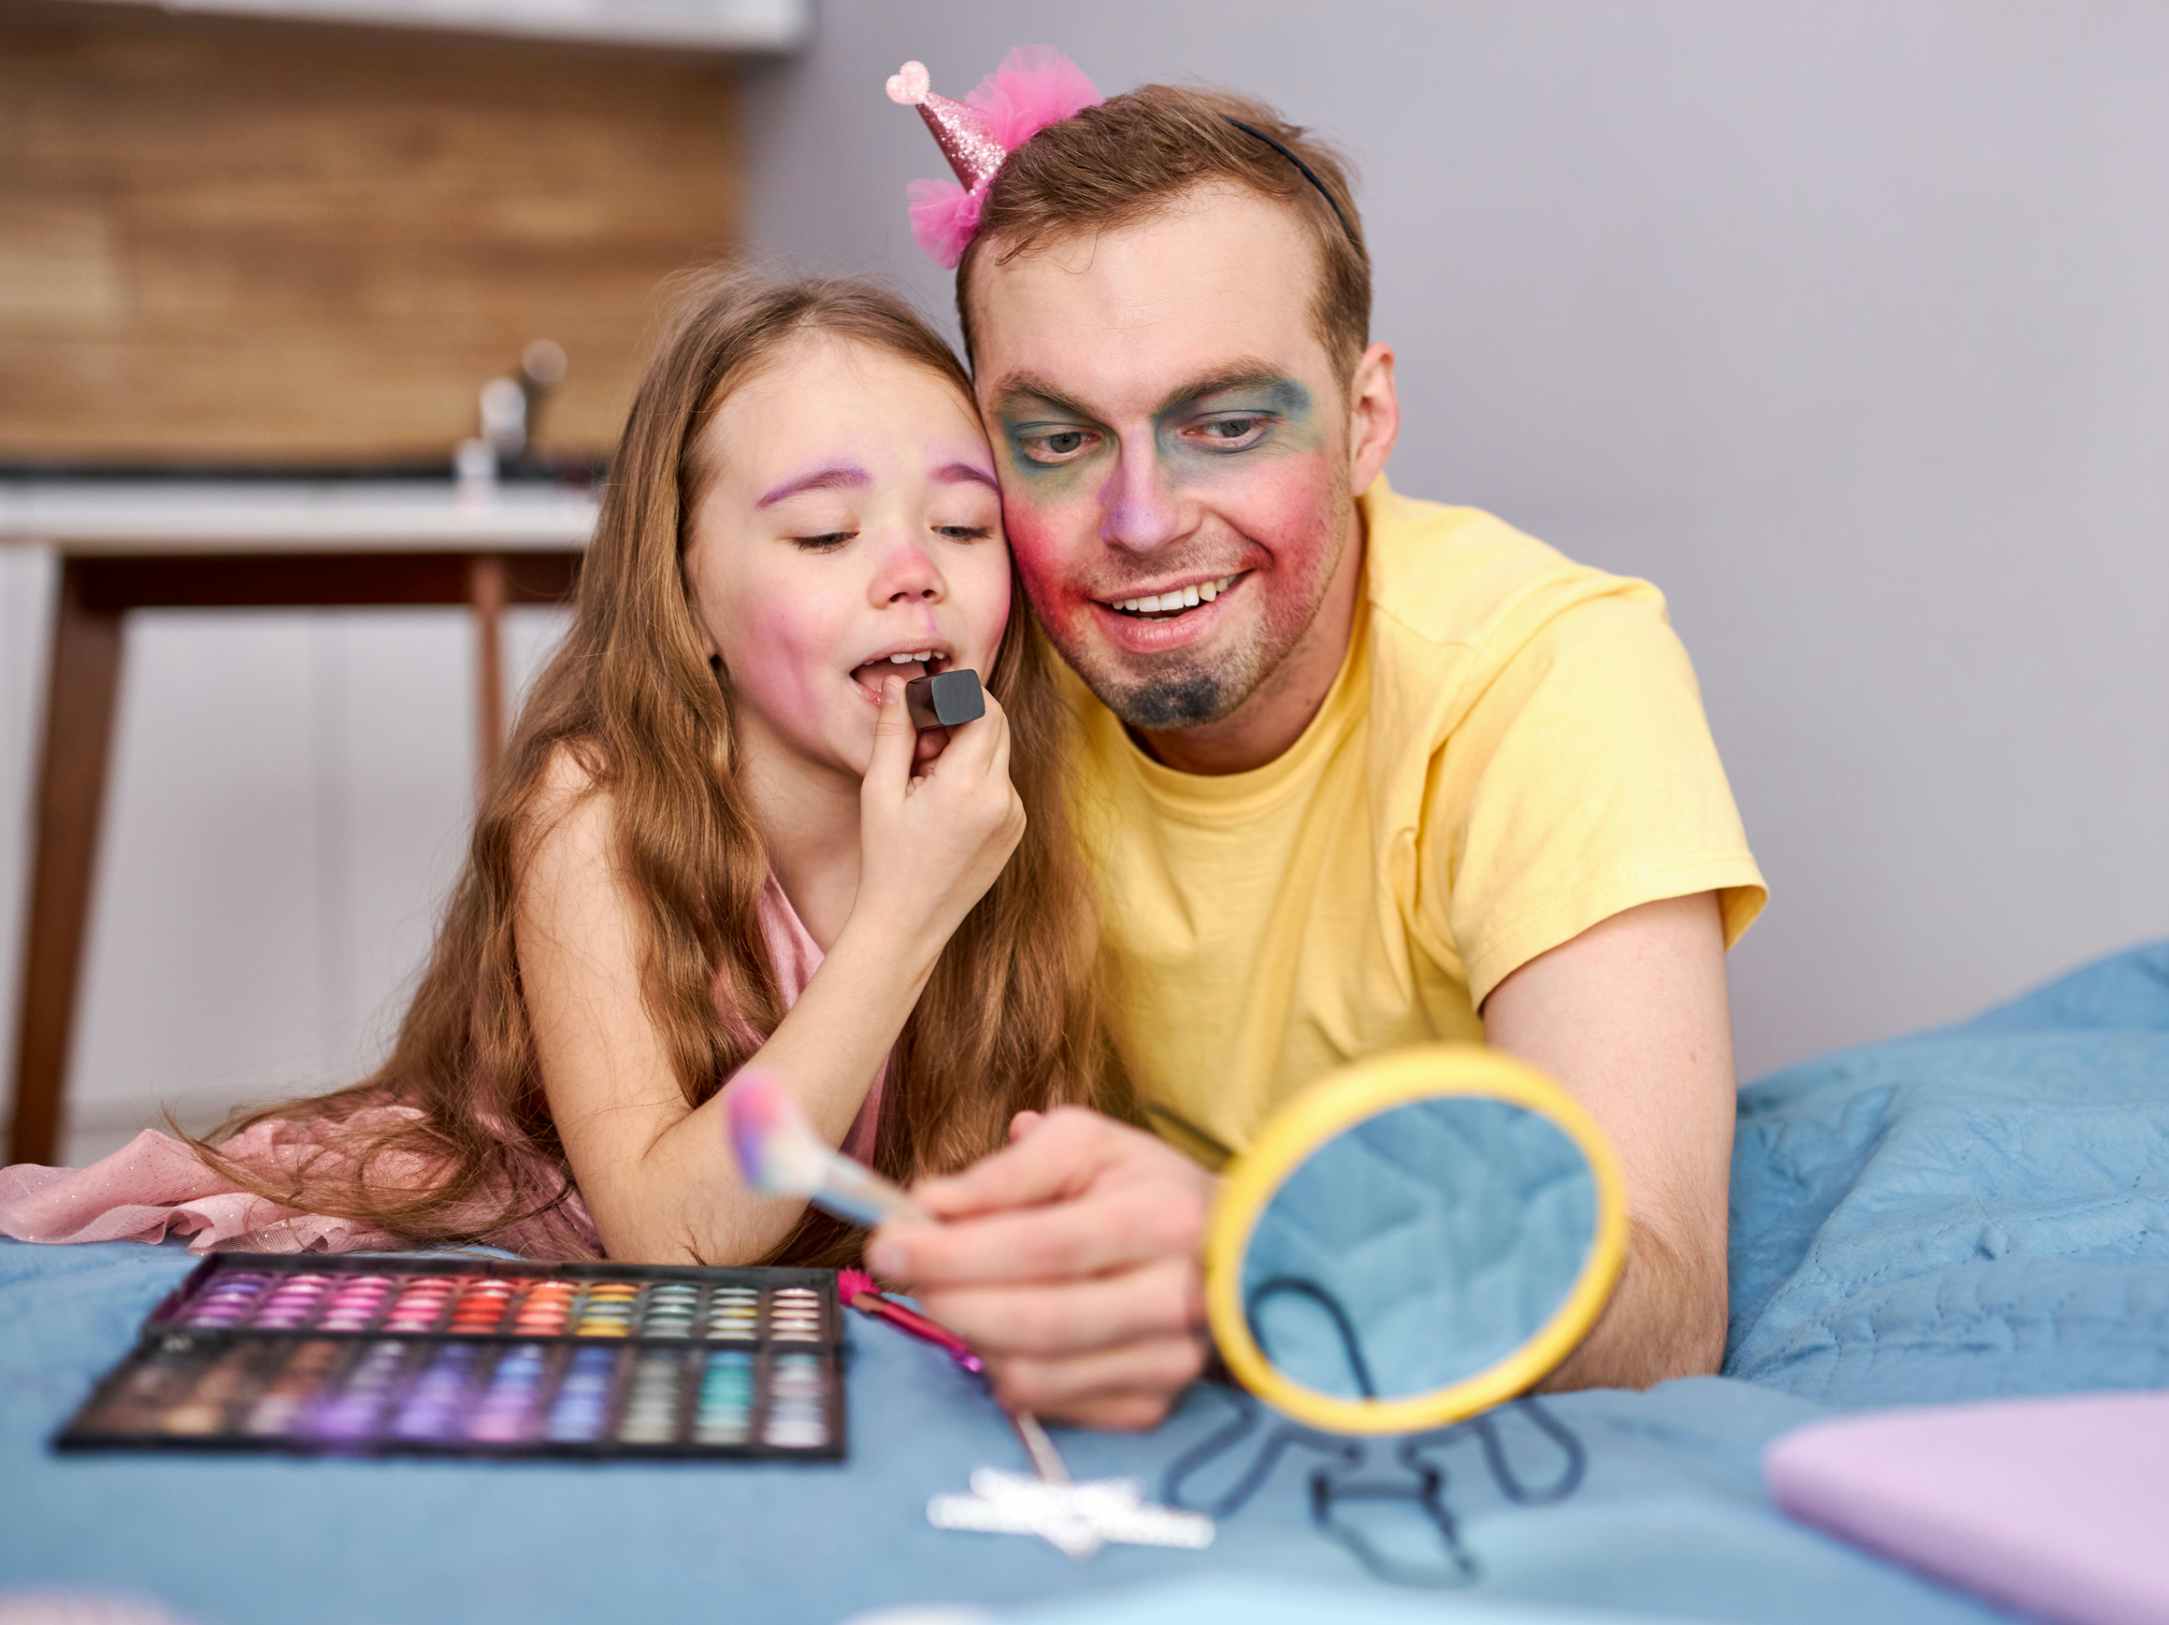 A father and daughter doing makeup together using costume makeup